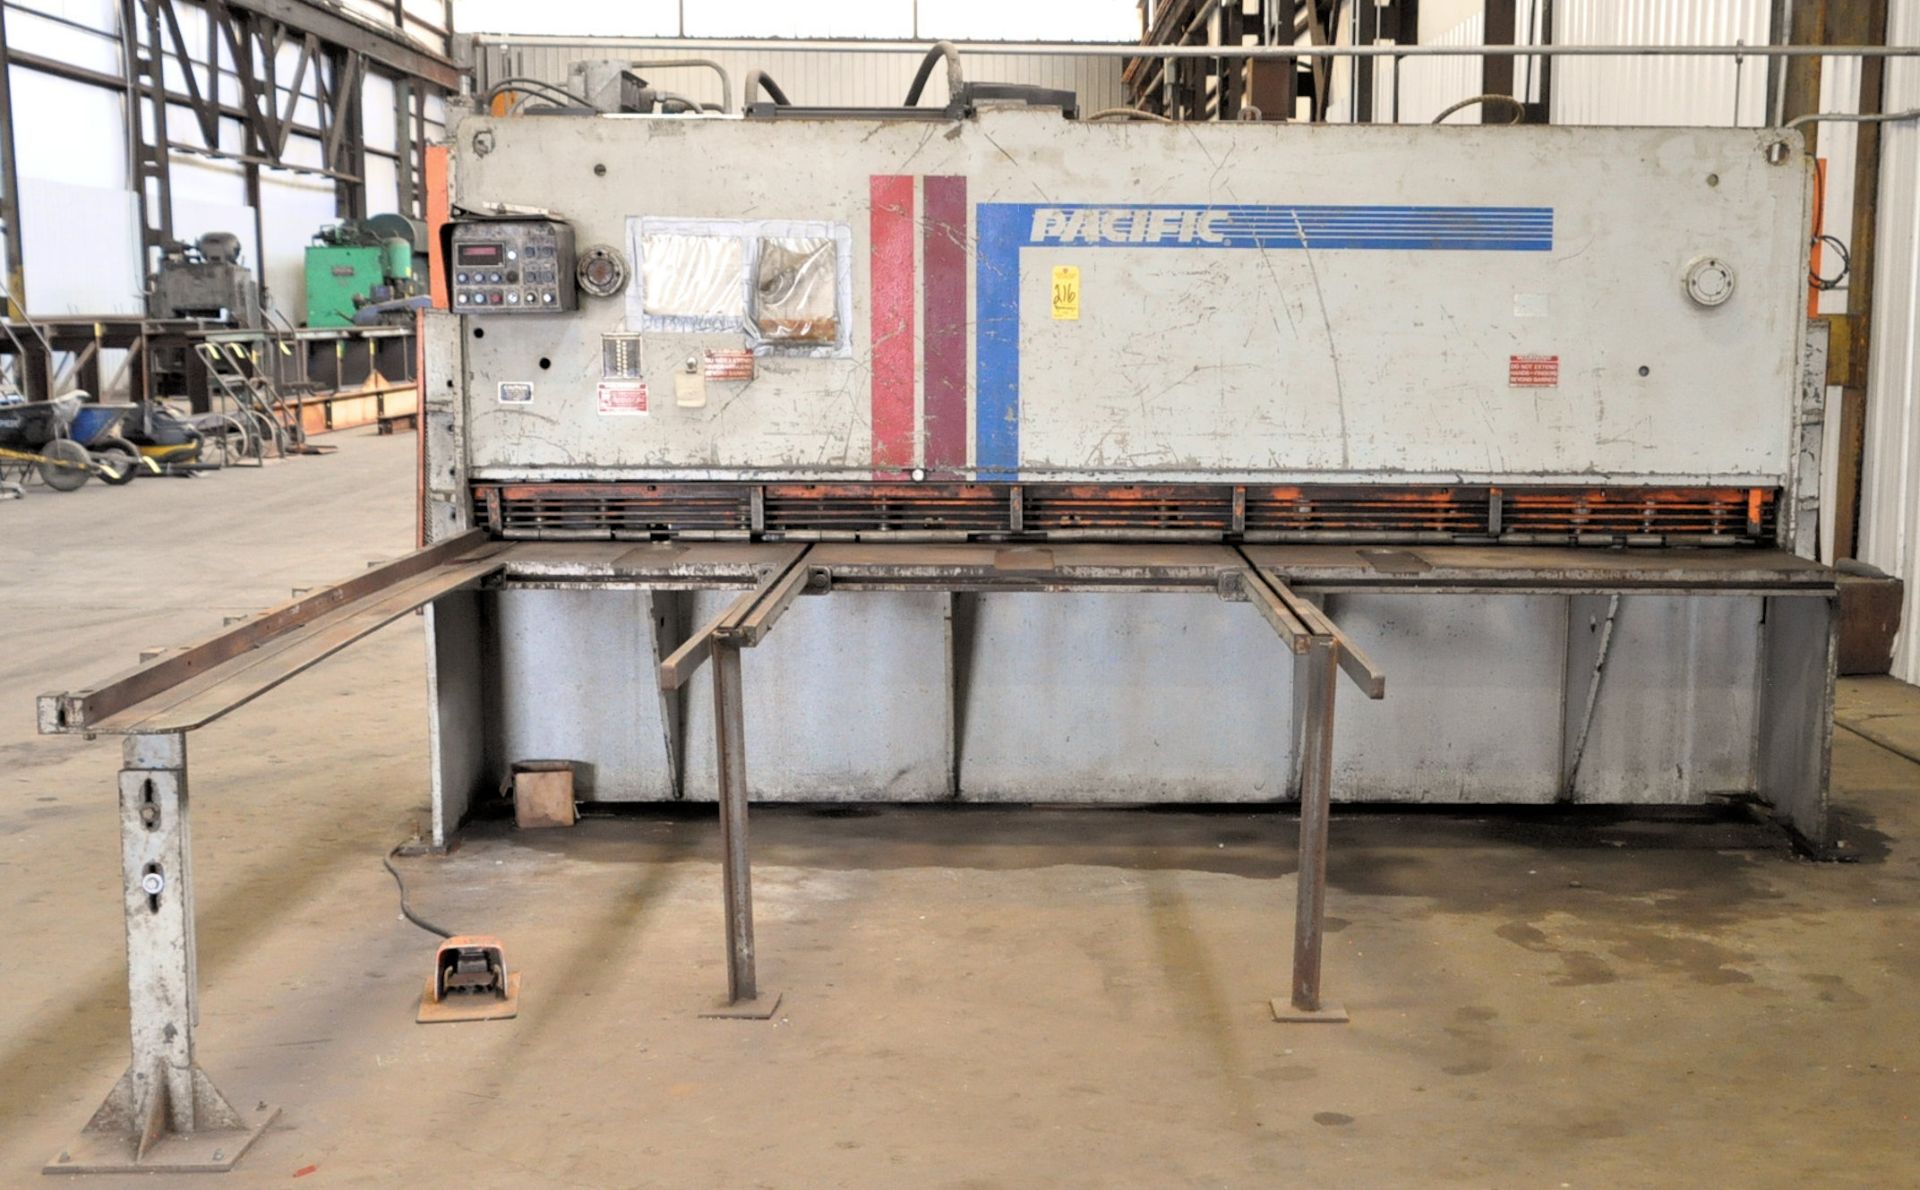 Pacific HTC Model 250-12PS, 144" x .250 Mild Steel Hydraulic Squaring Shear, s/n 3923040, Pacific HT - Image 2 of 7